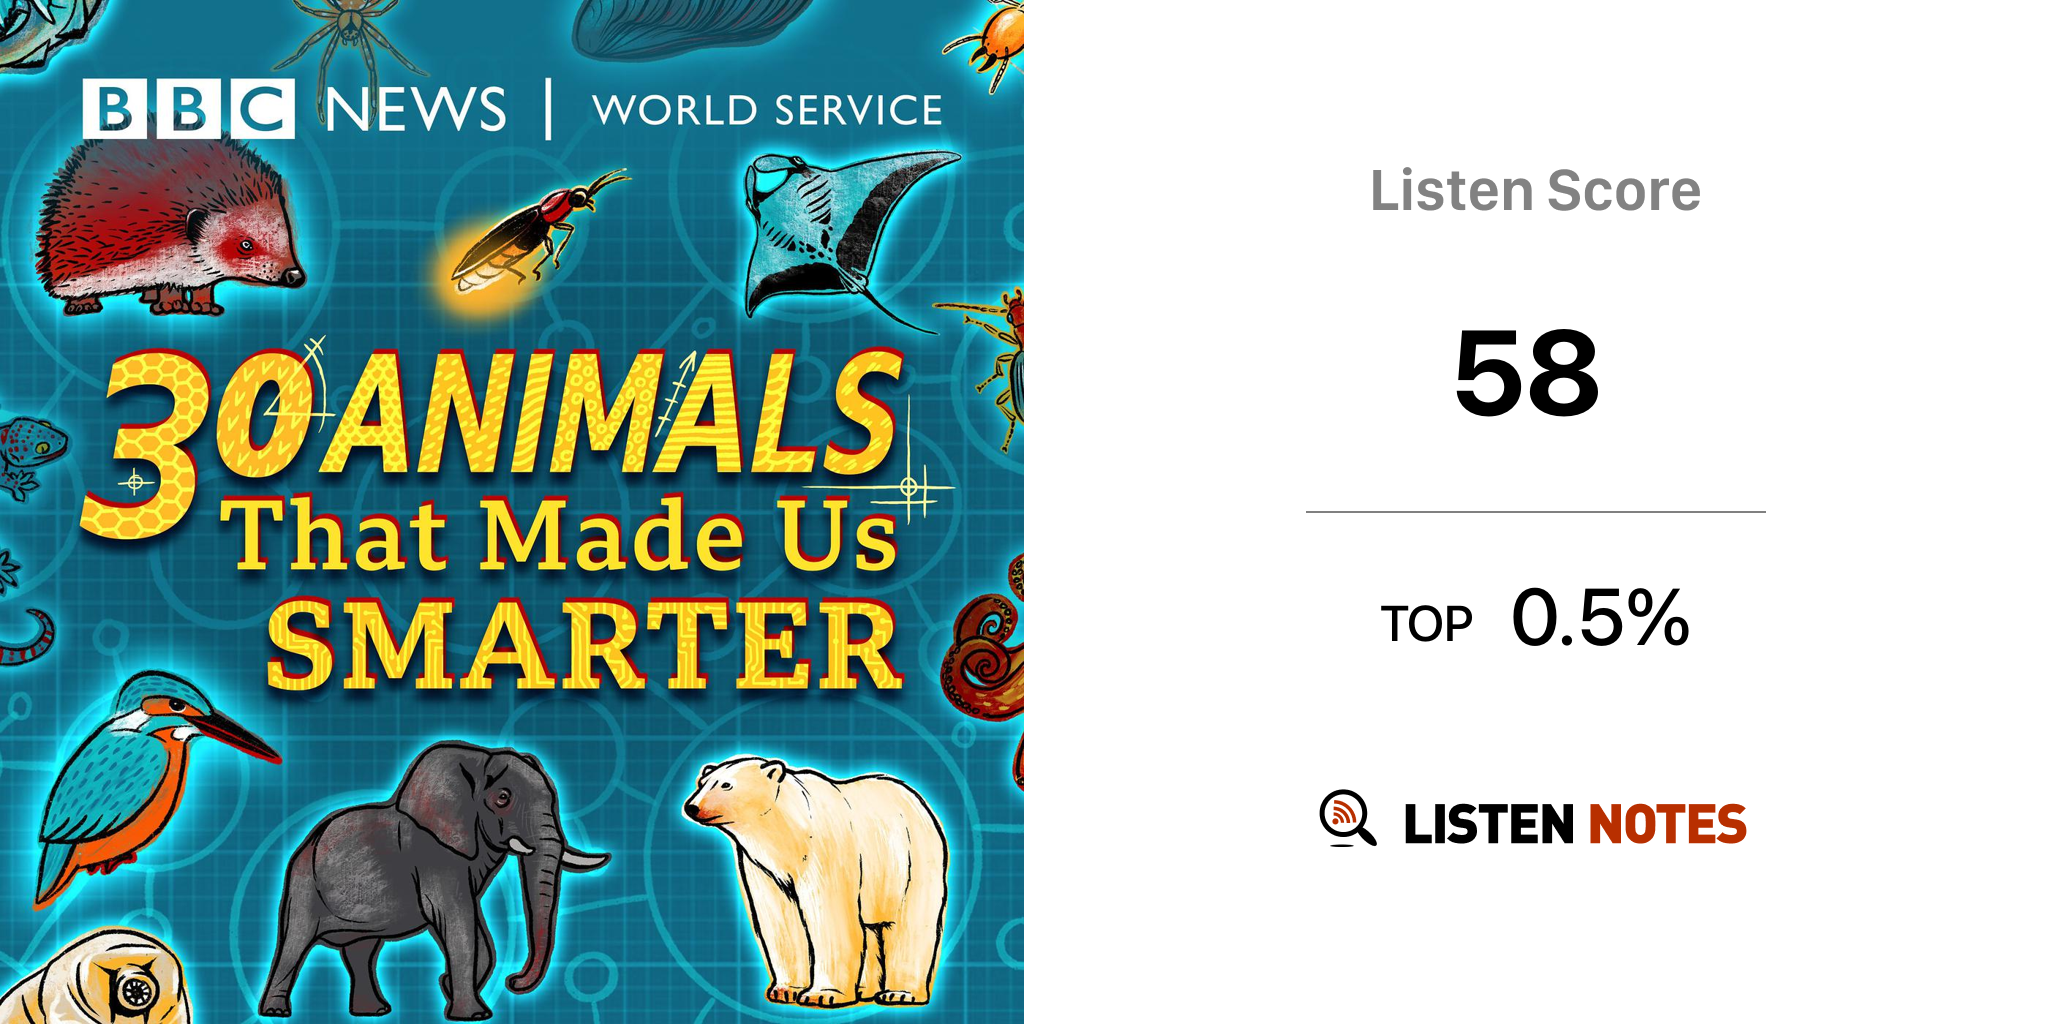 30 Animals That Made Us Smarter (podcast) - BBC World Service | Listen Notes